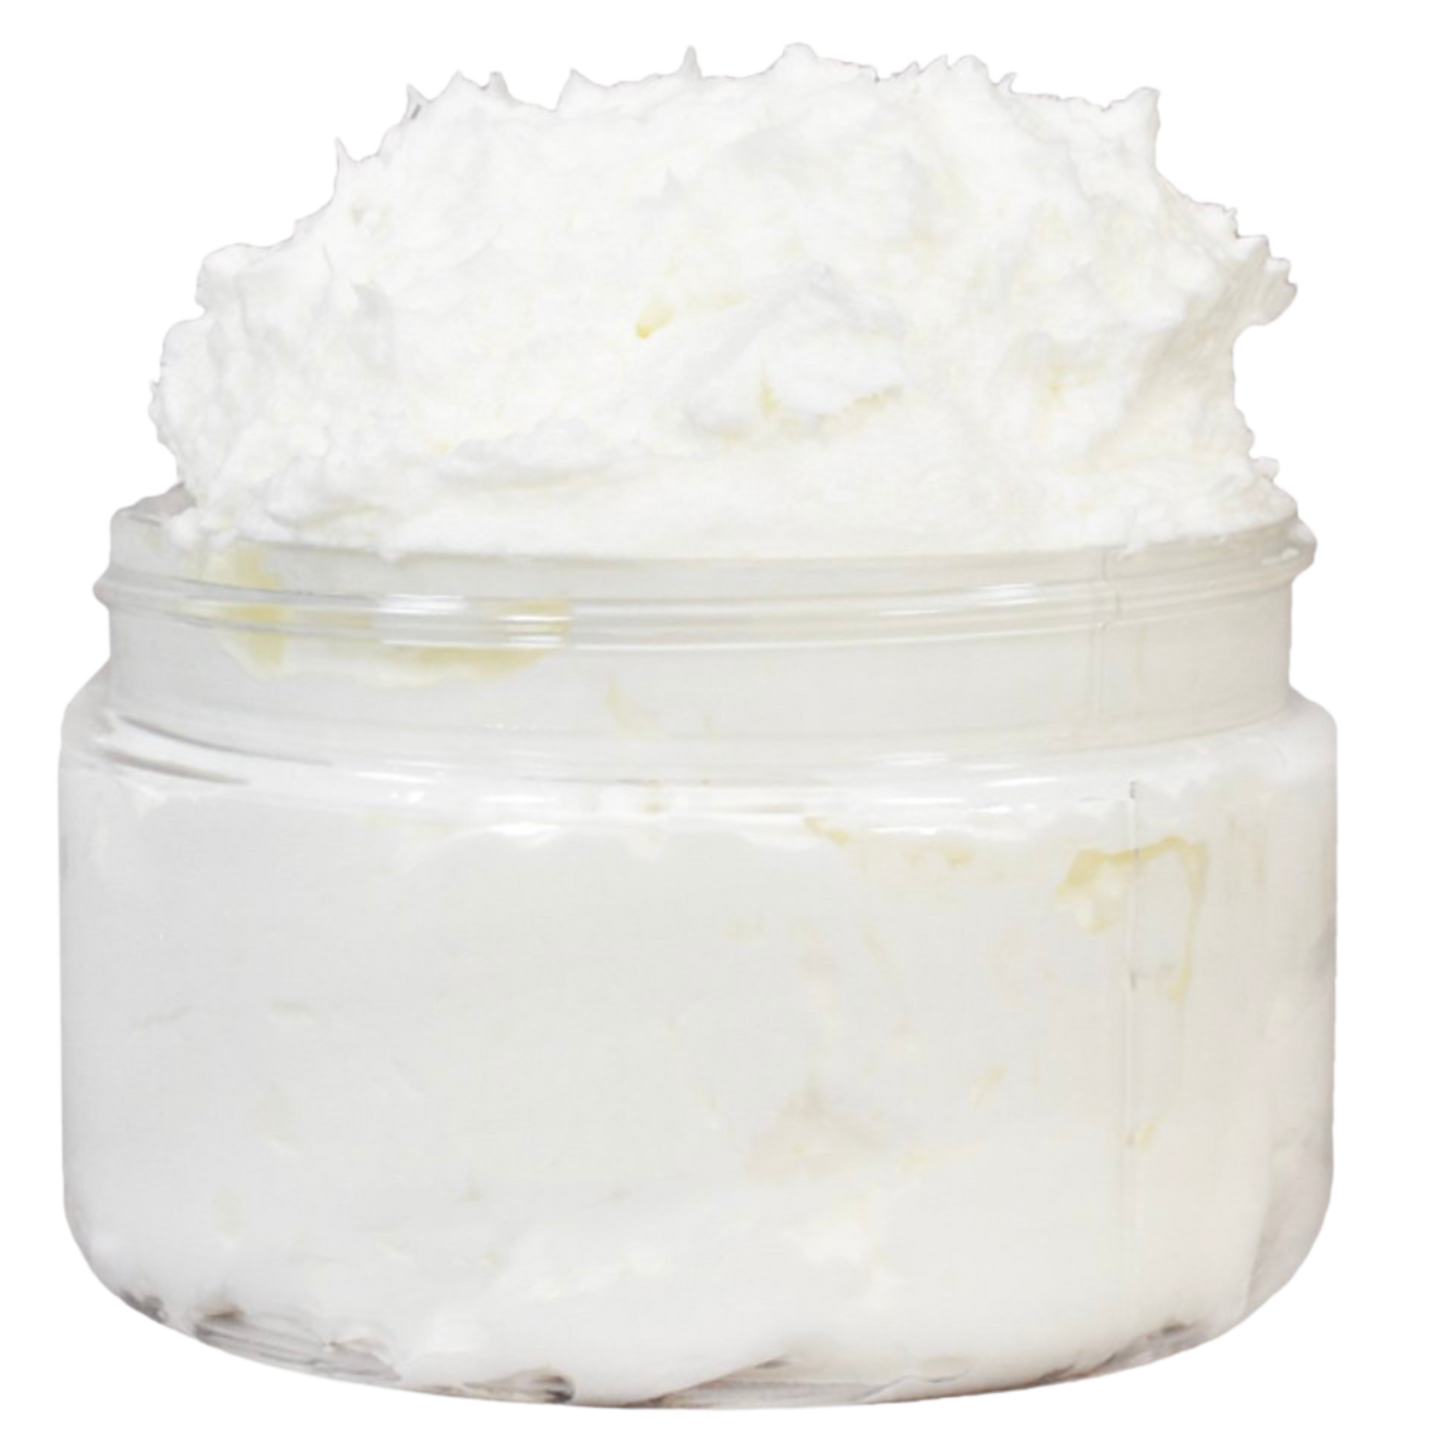 Simply Body Butter